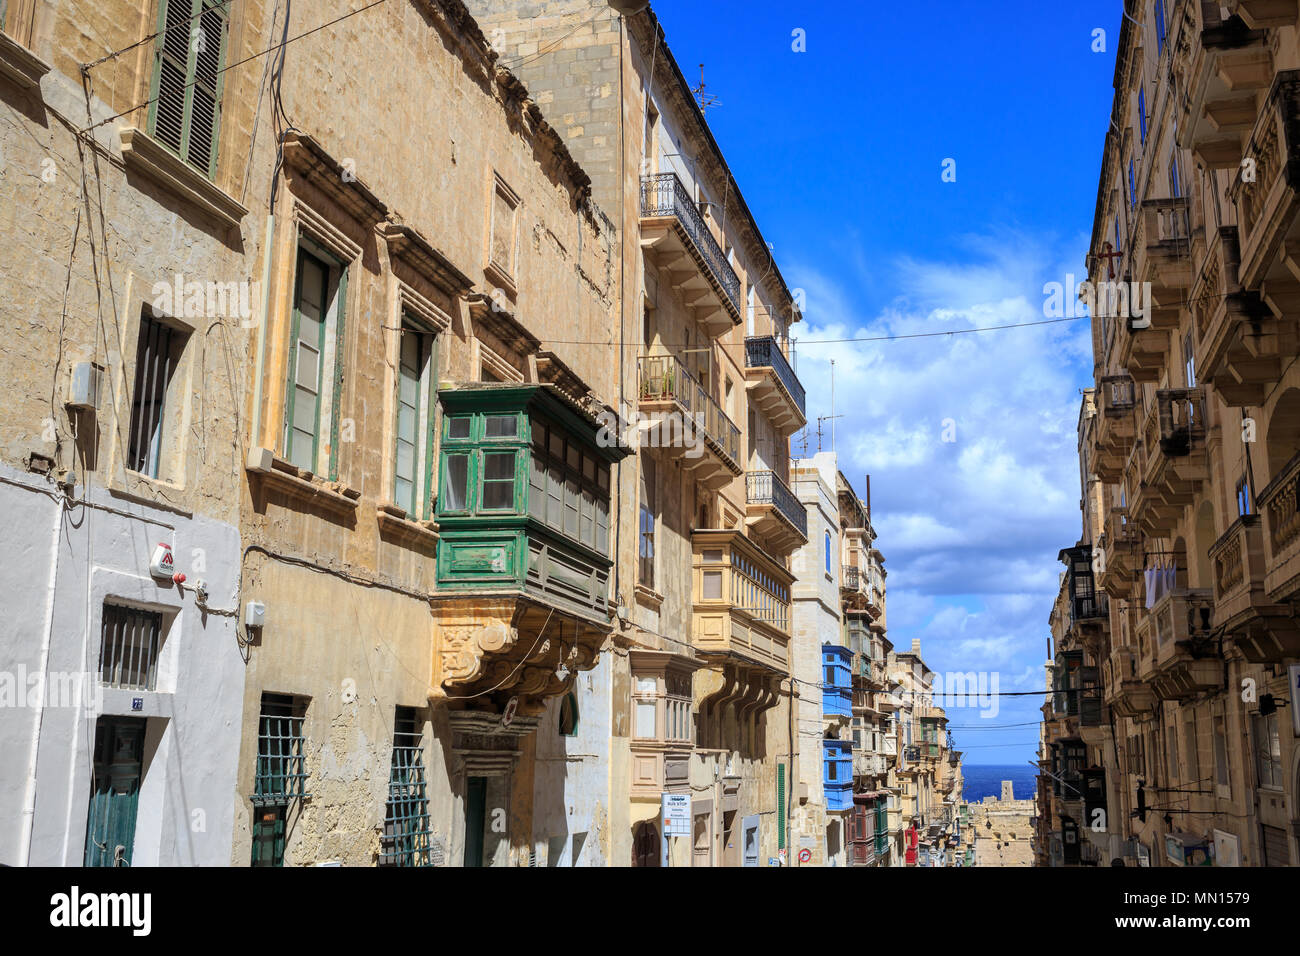 Malta, Valletta, traditional sandstone buildings with colorful wooden windows on covered balconies. Blue sky with clouds and sea background. Stock Photo